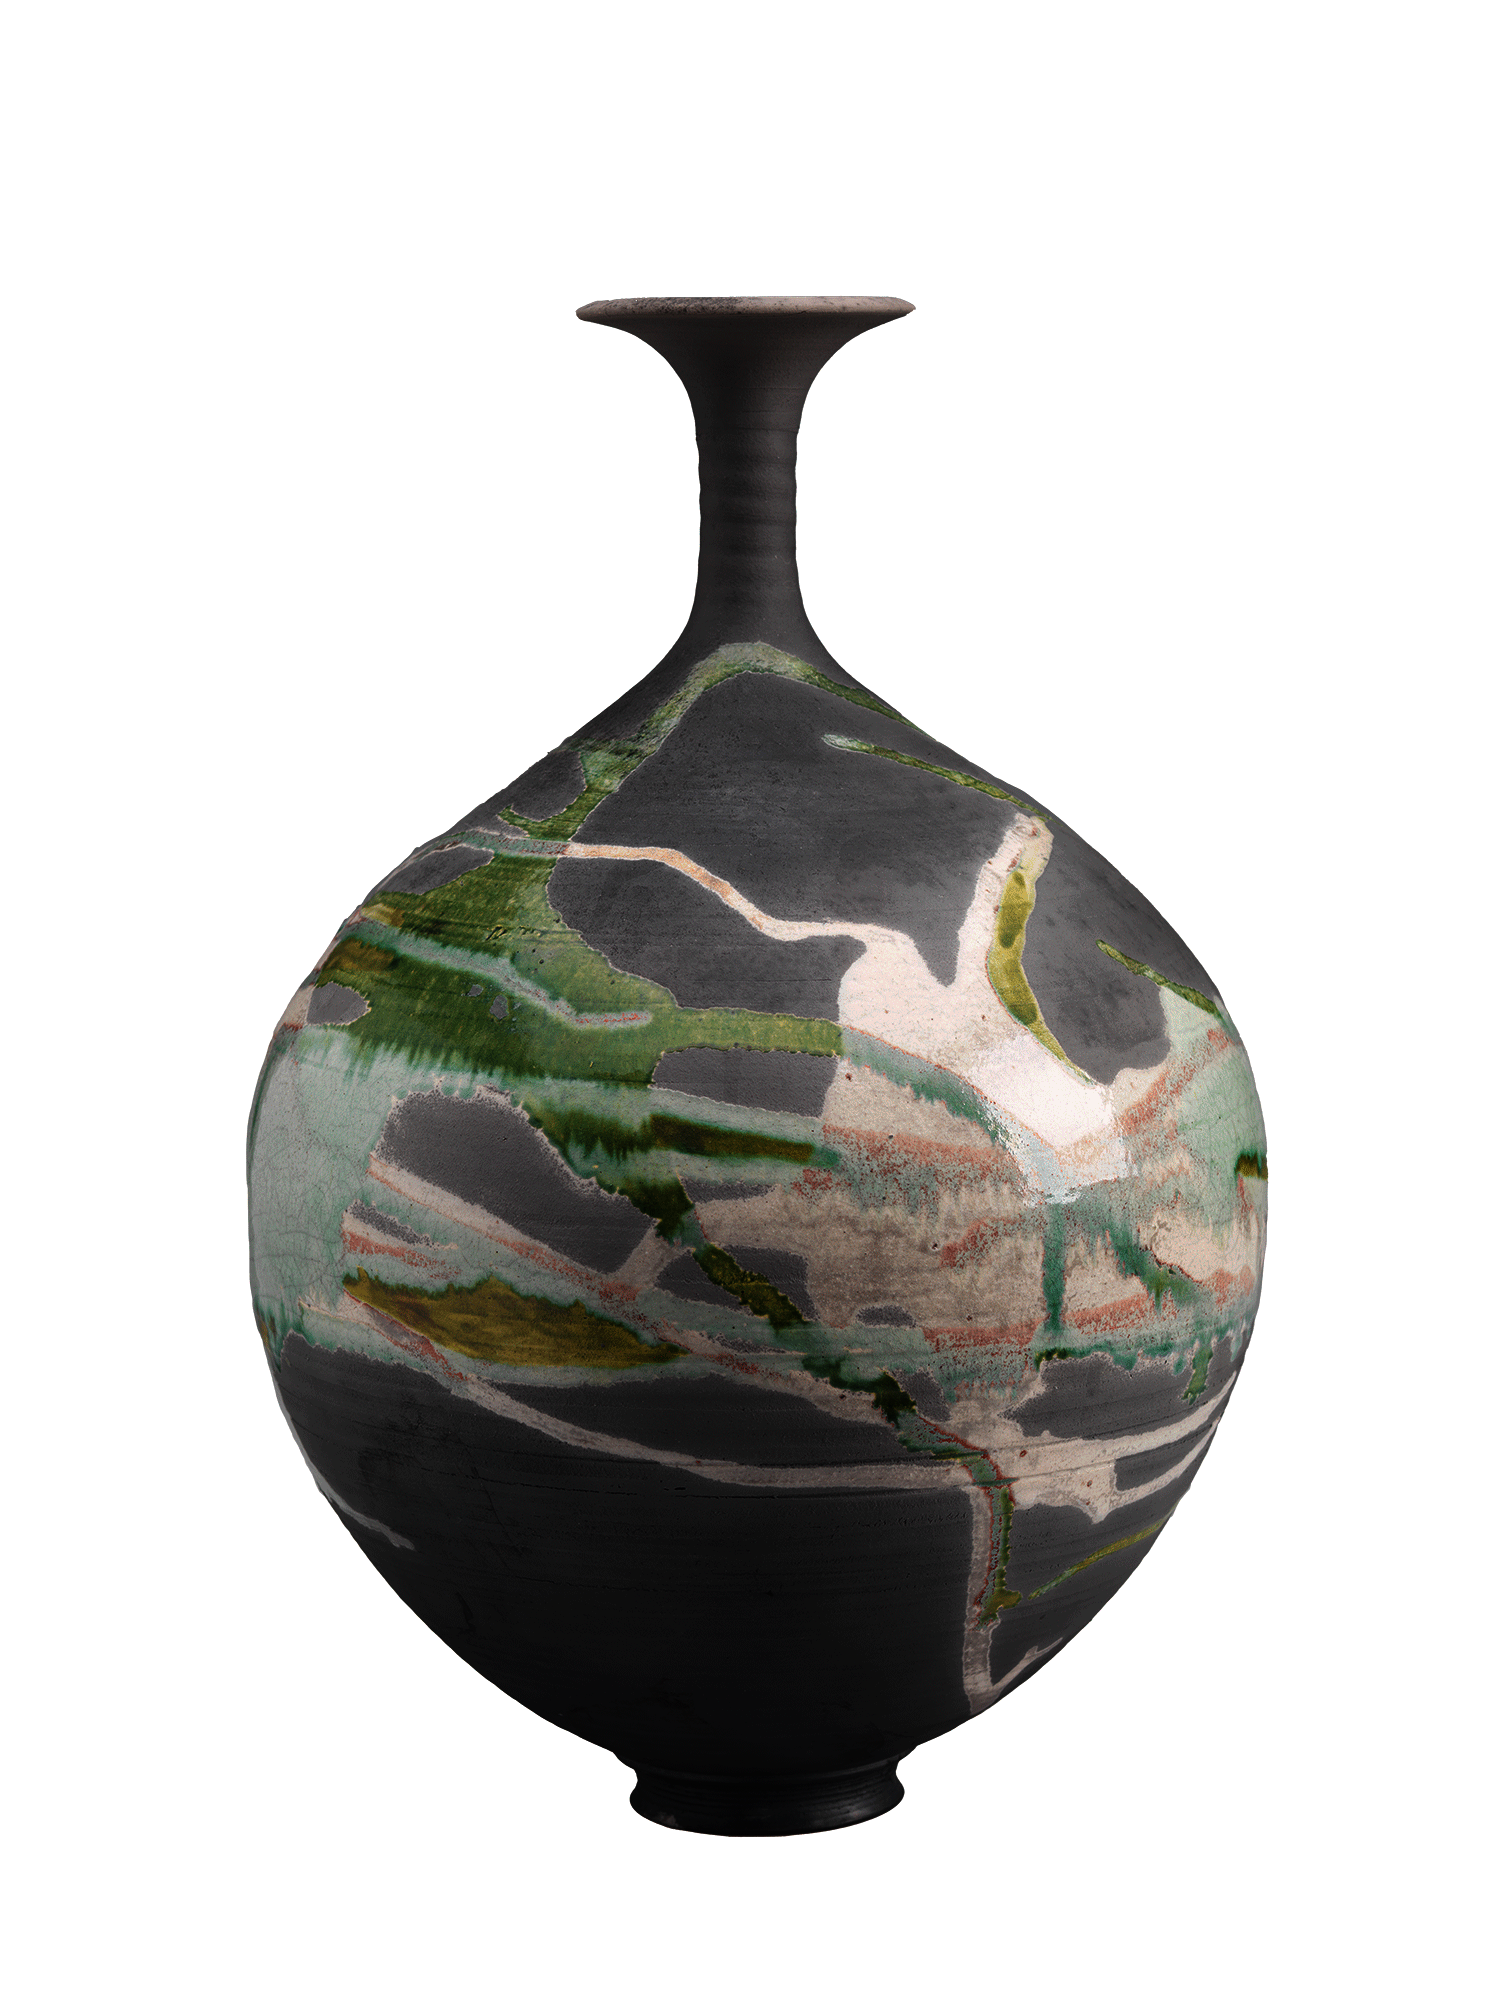 Grey earthenware vessel with green and pink streaks of glaze